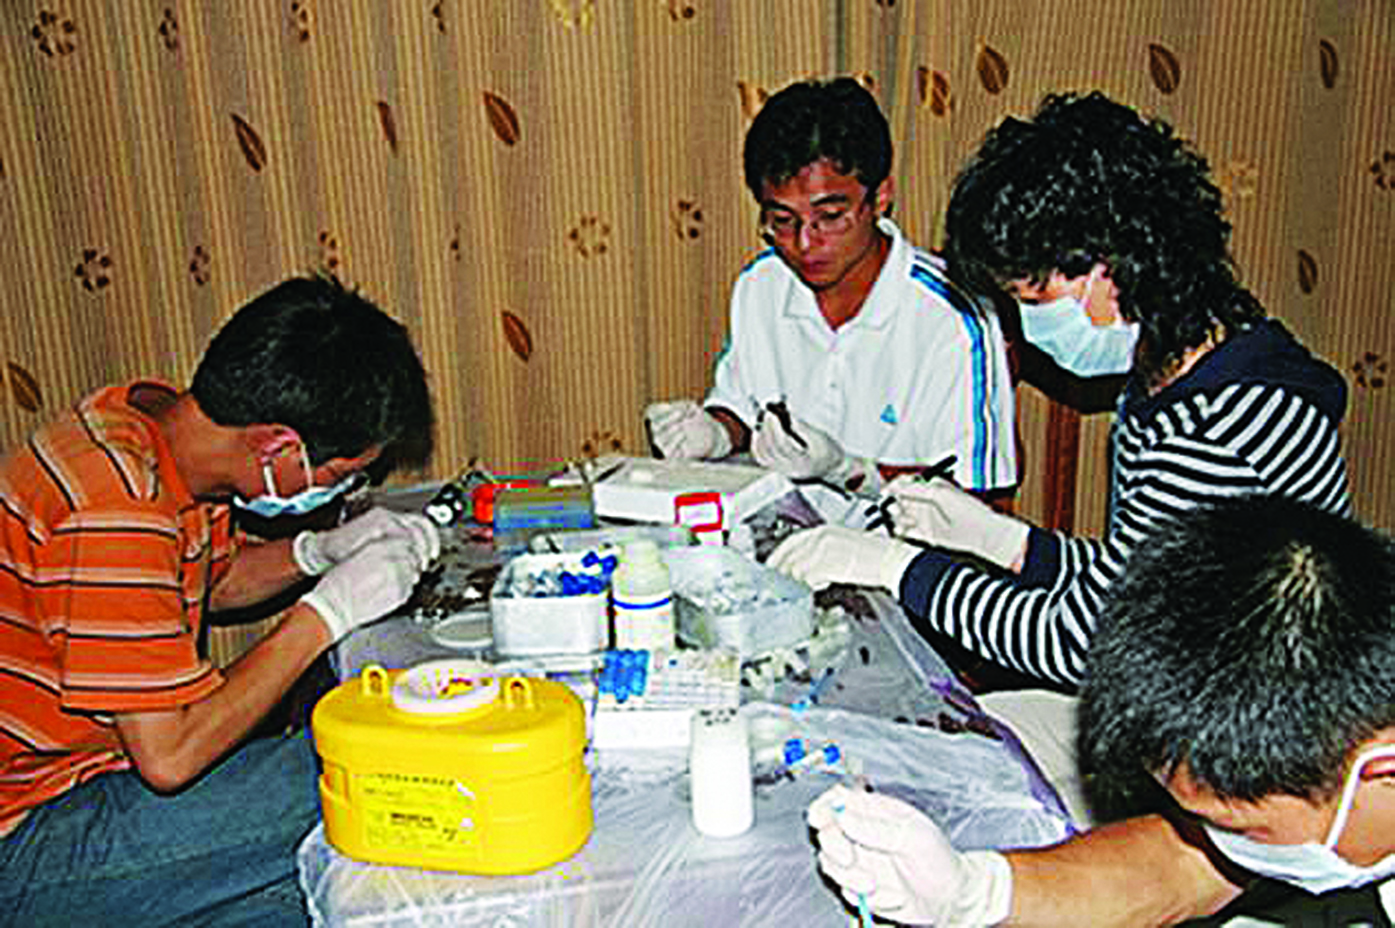 The emerging viruses group handling bats taken from archive photography